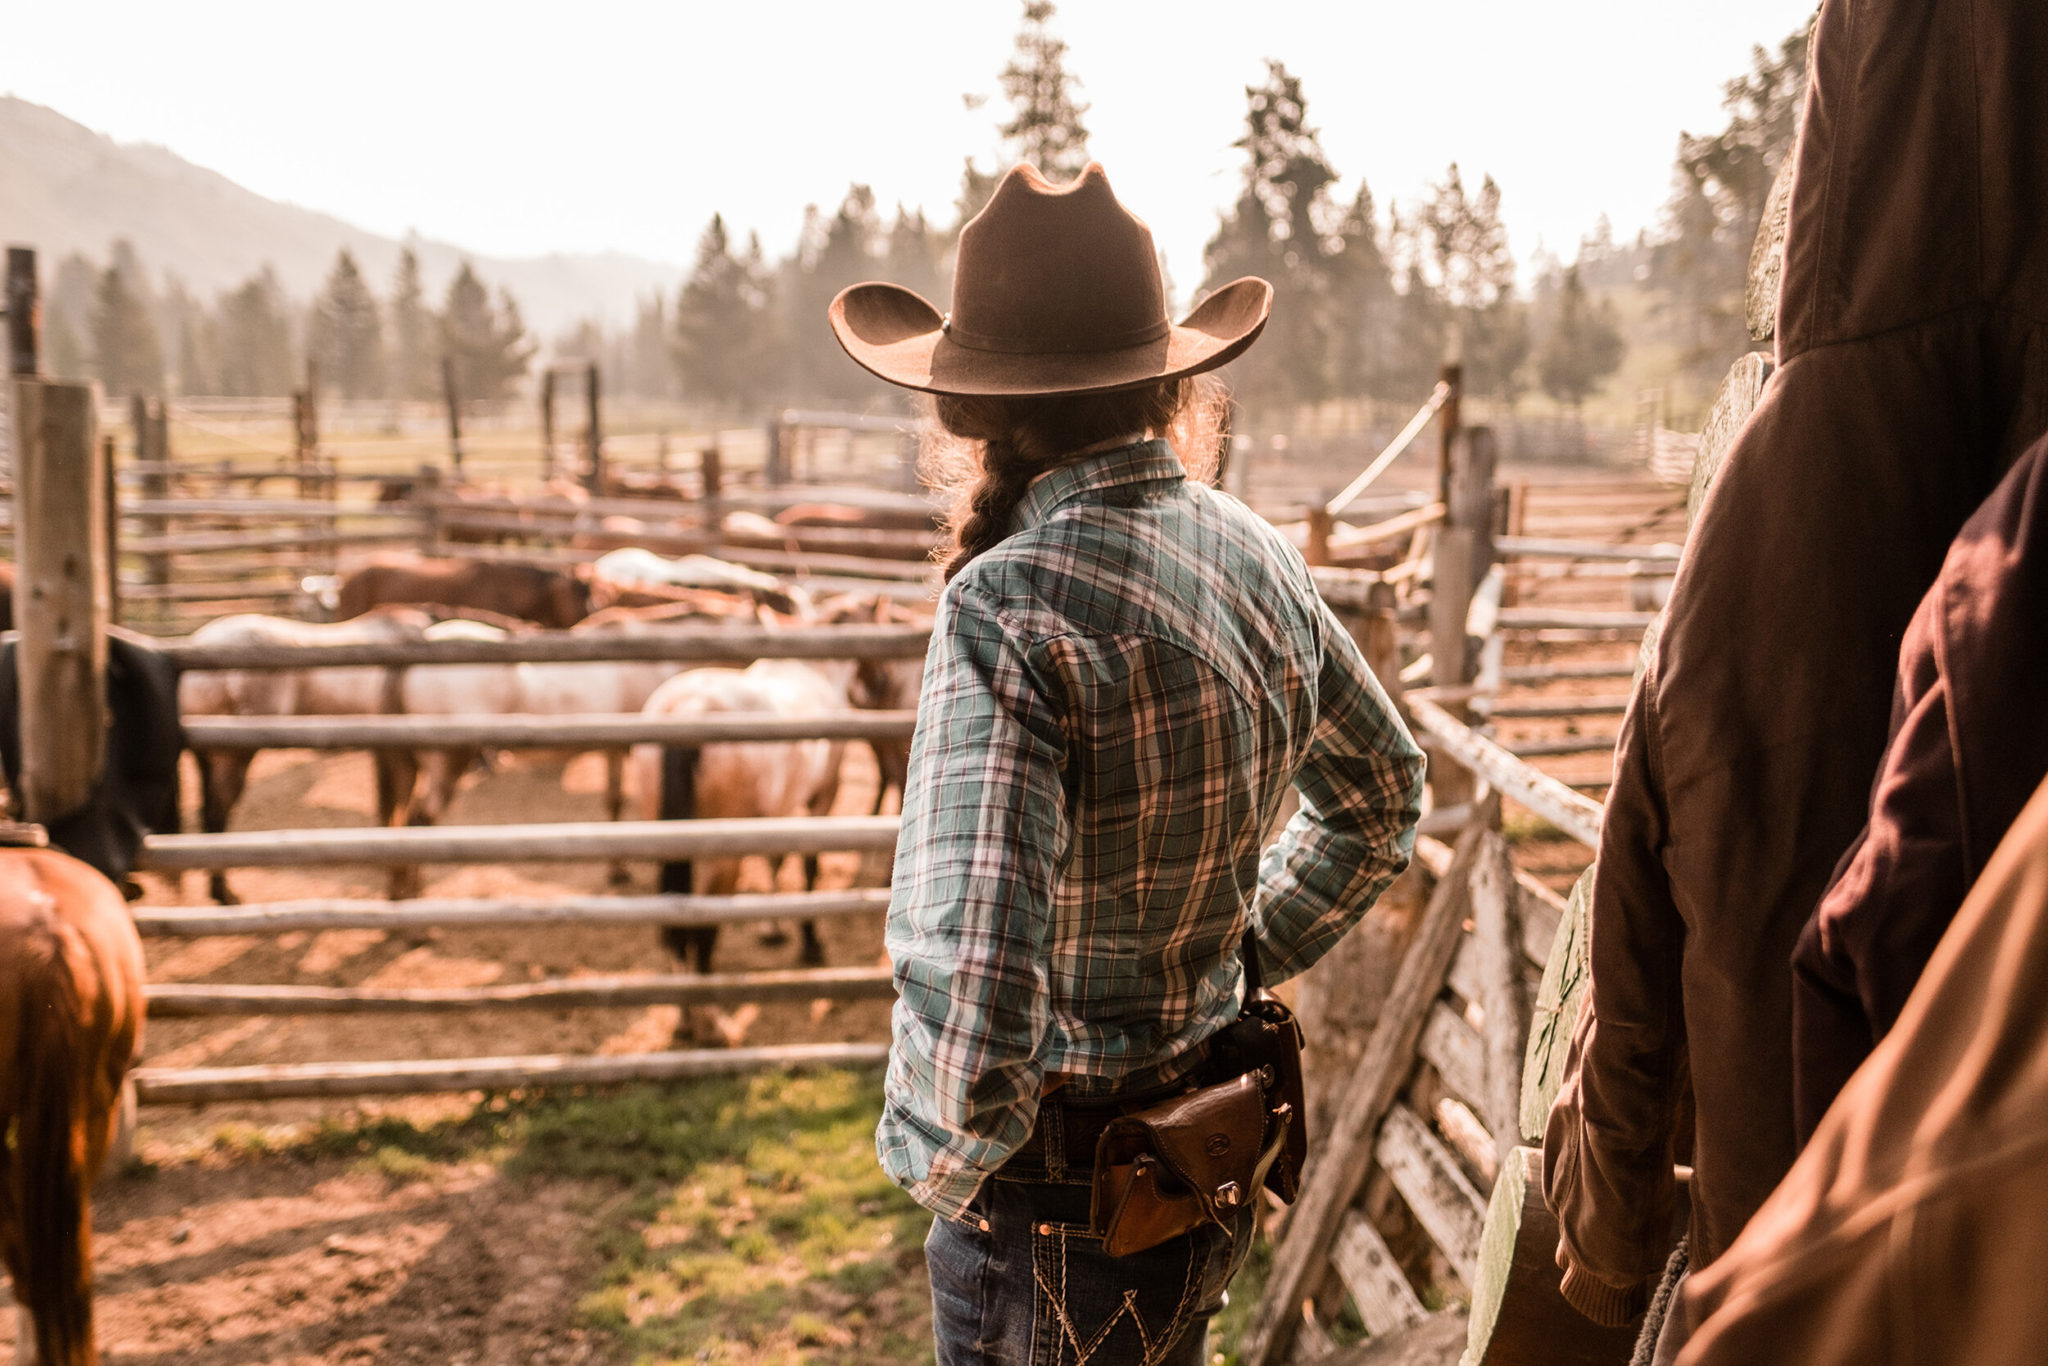 5 Tips to Find Last Minute Summer Job The Dude Ranchers' Association